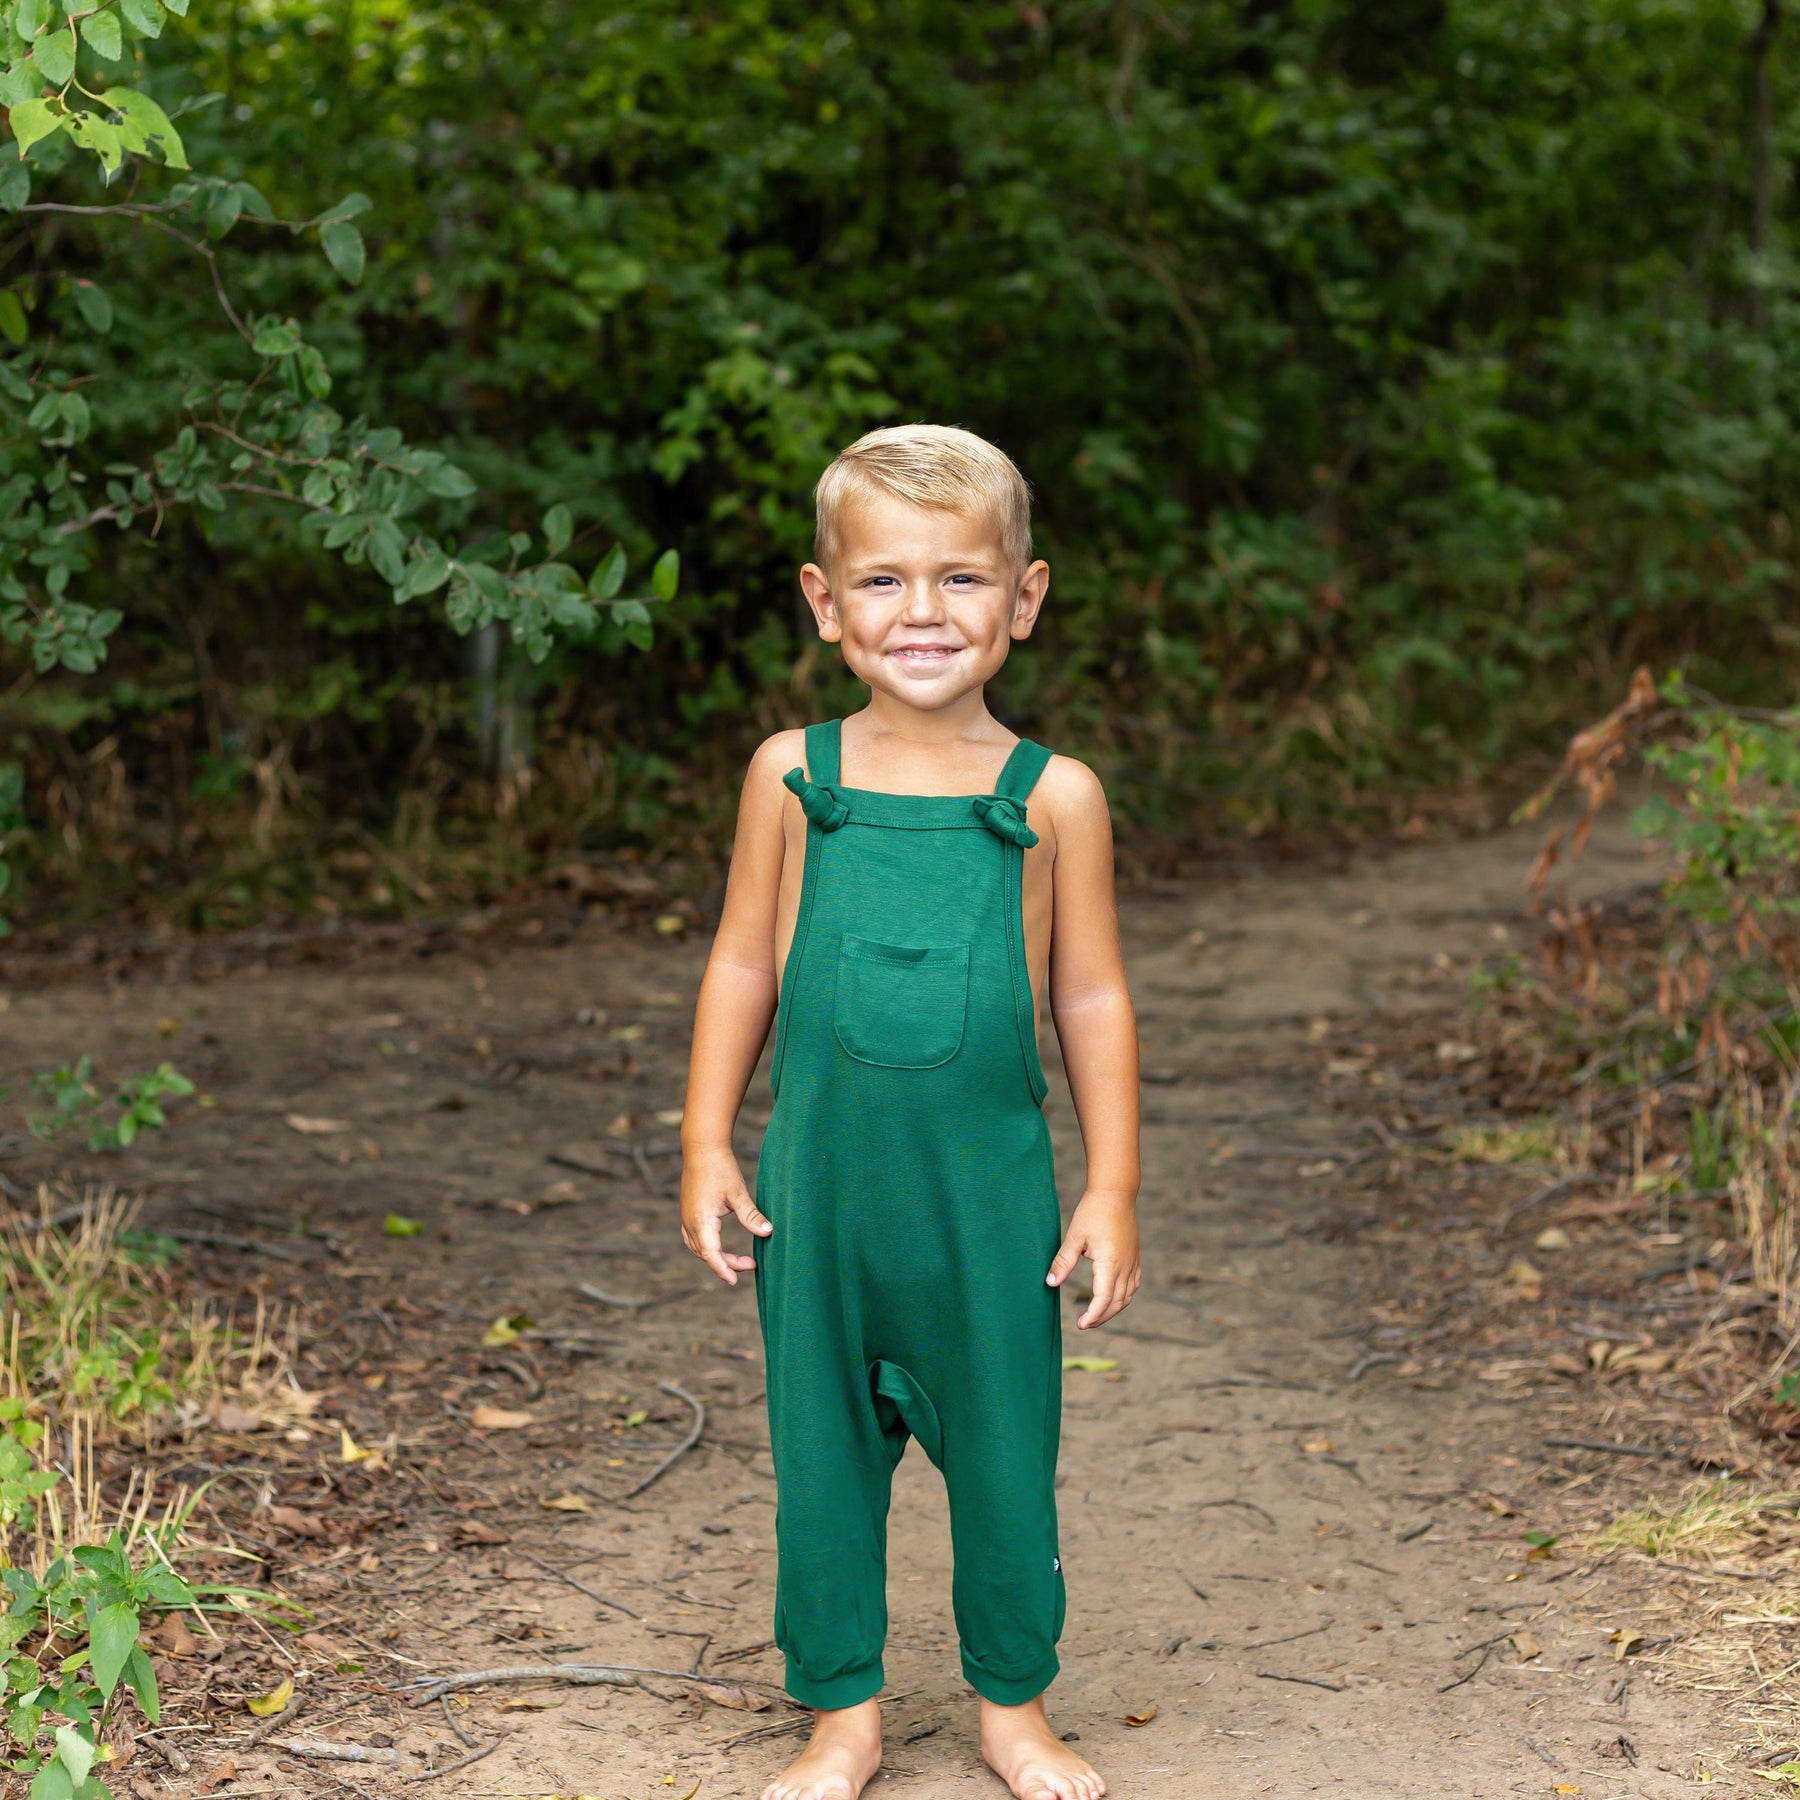 Kyte Baby Baby Overall Bamboo Jersey Overall in Forest